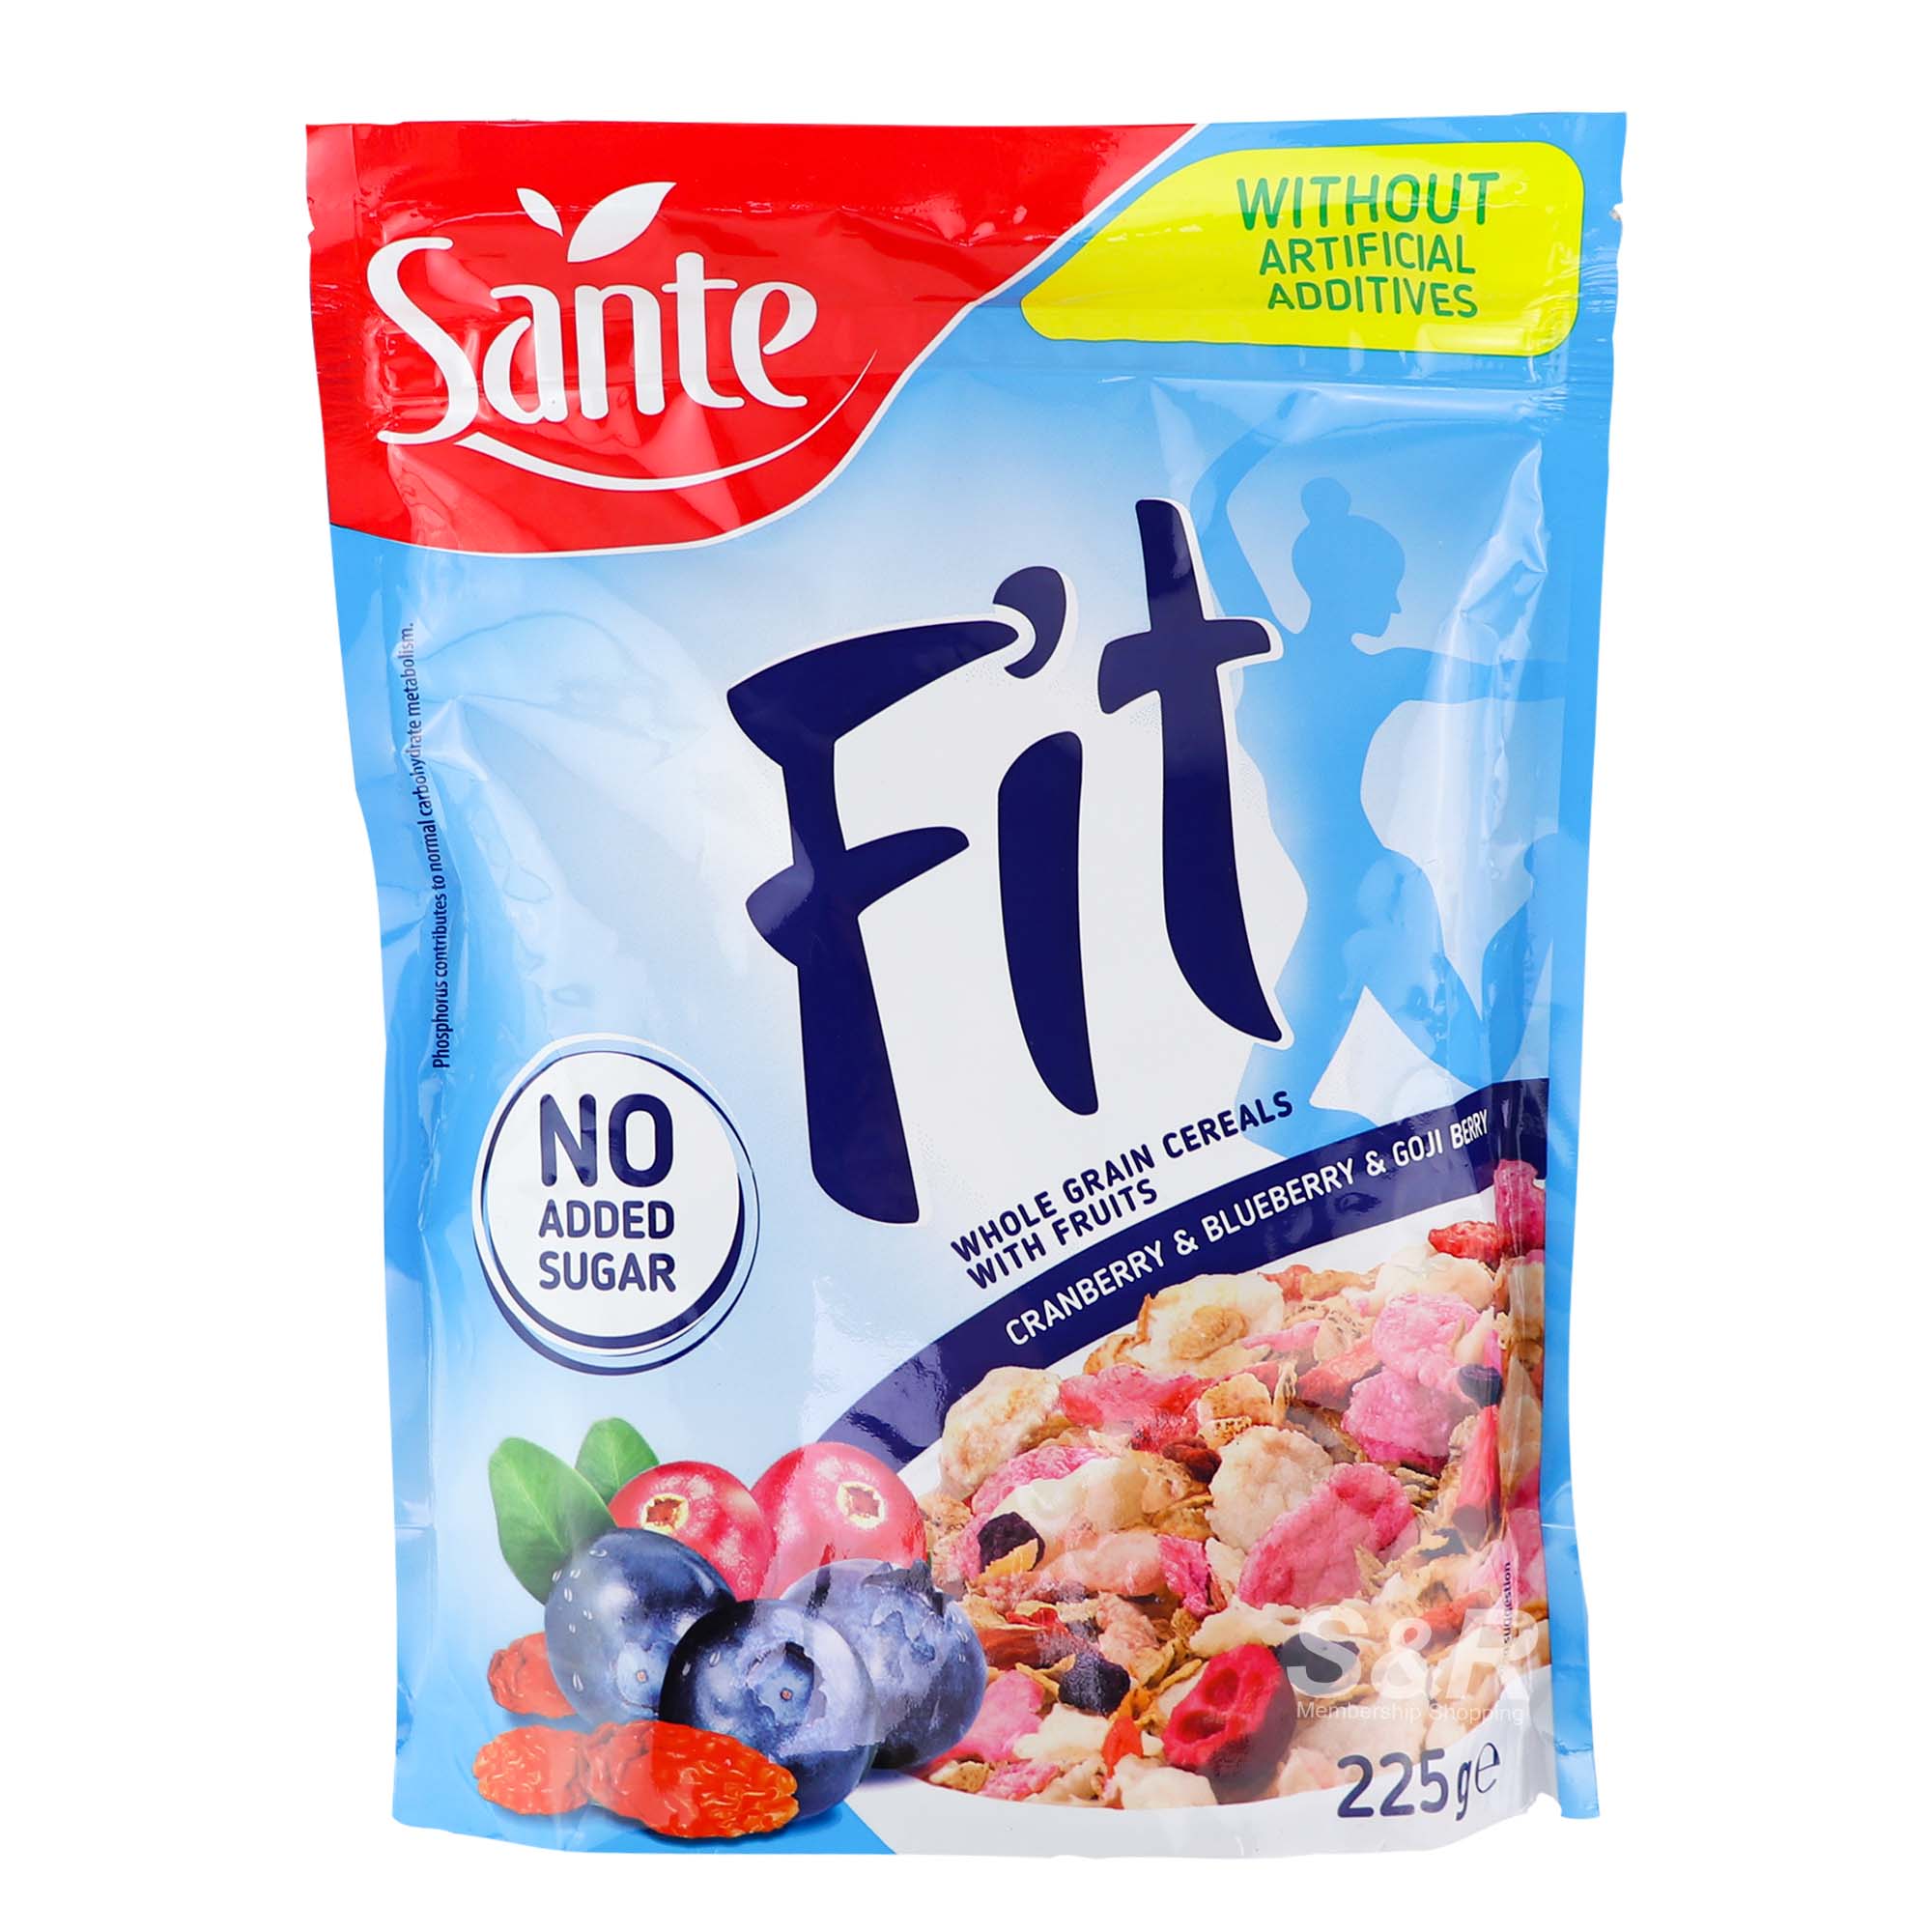 Sante Fit Cranberry Blueberry And Goji Berry Breakfast Cereal 225g